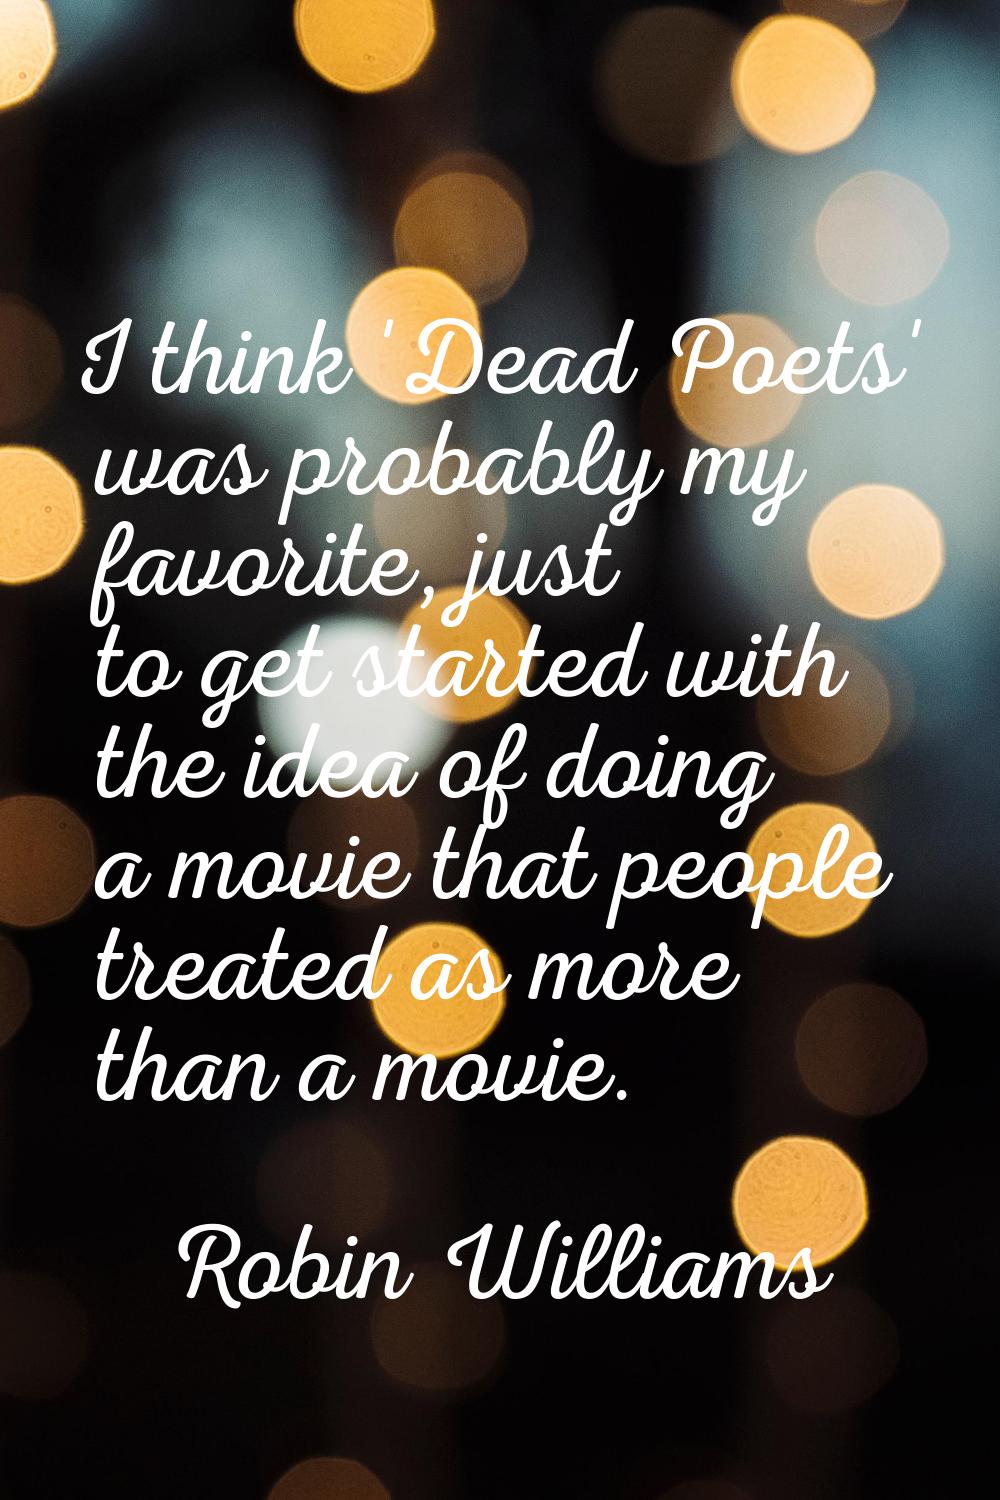 I think 'Dead Poets' was probably my favorite, just to get started with the idea of doing a movie t